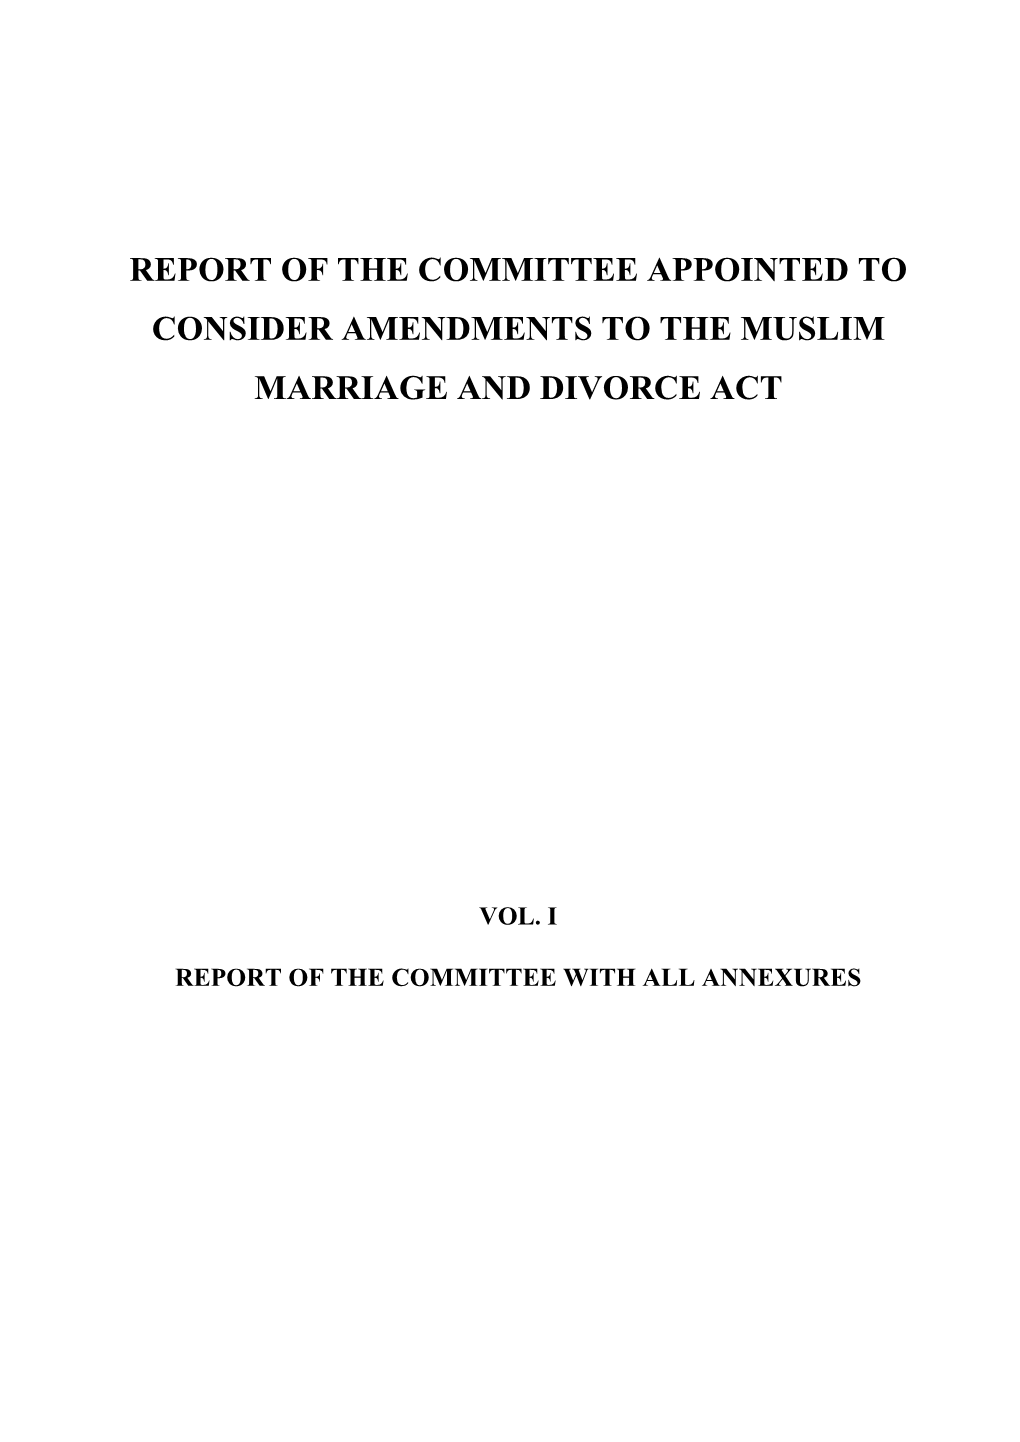 Report of the Committee Appointed to Consider Amendments to the Muslim Marriage and Divorce Act